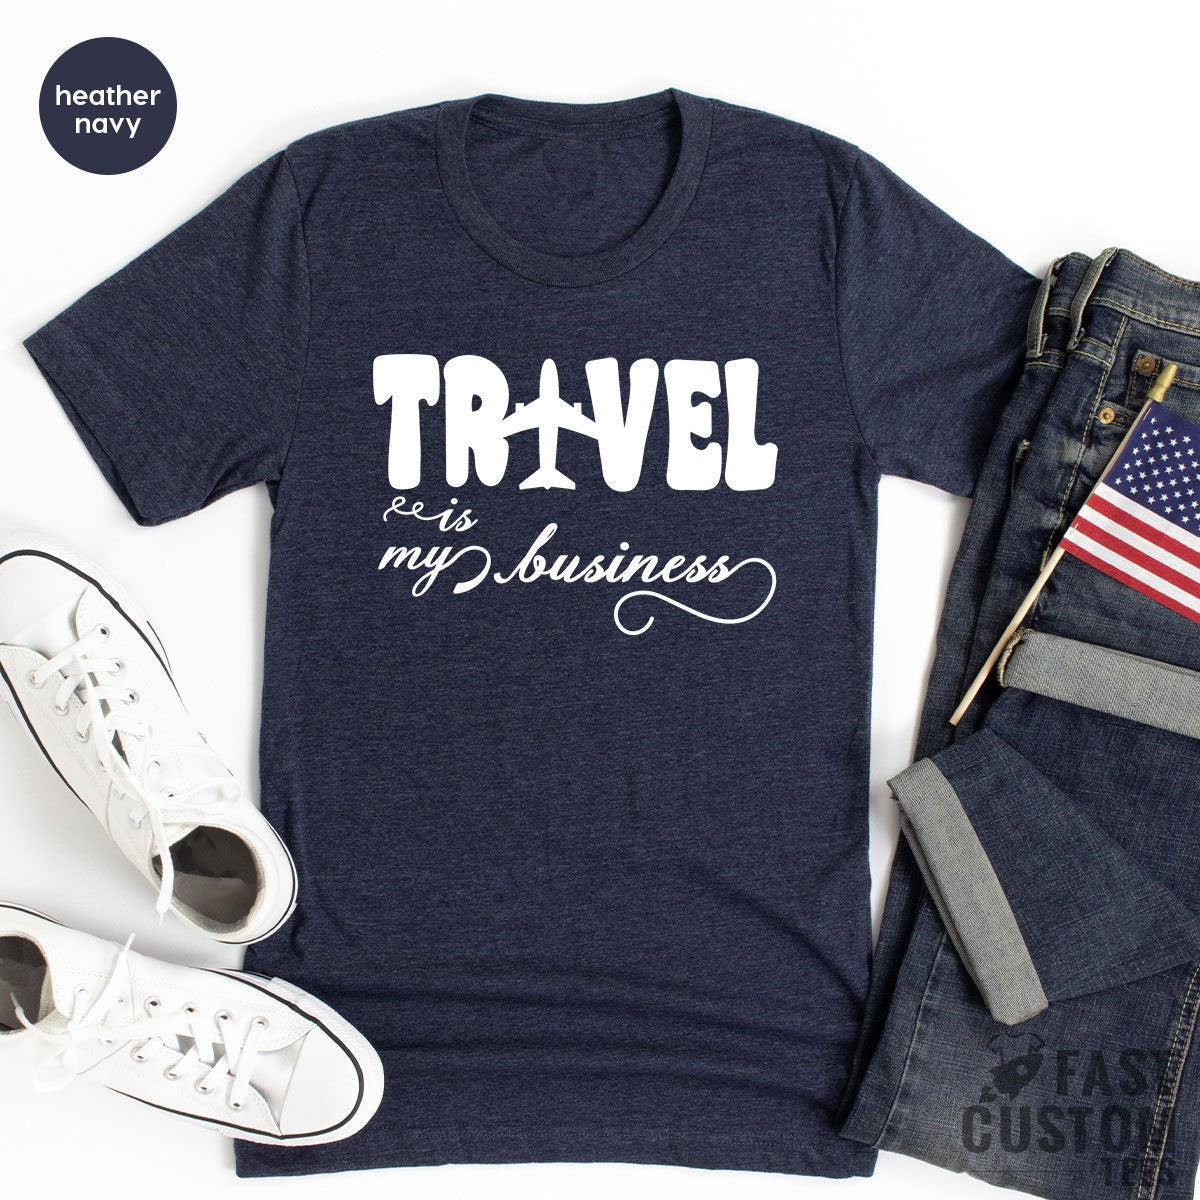 Travel Is My Business Shirt, Gift For Flight Attendant, Flight Attendant Shirt, Pilot Shirt, Traveler Gifts, Travel Shirt, Adventure Shirt - Fastdeliverytees.com